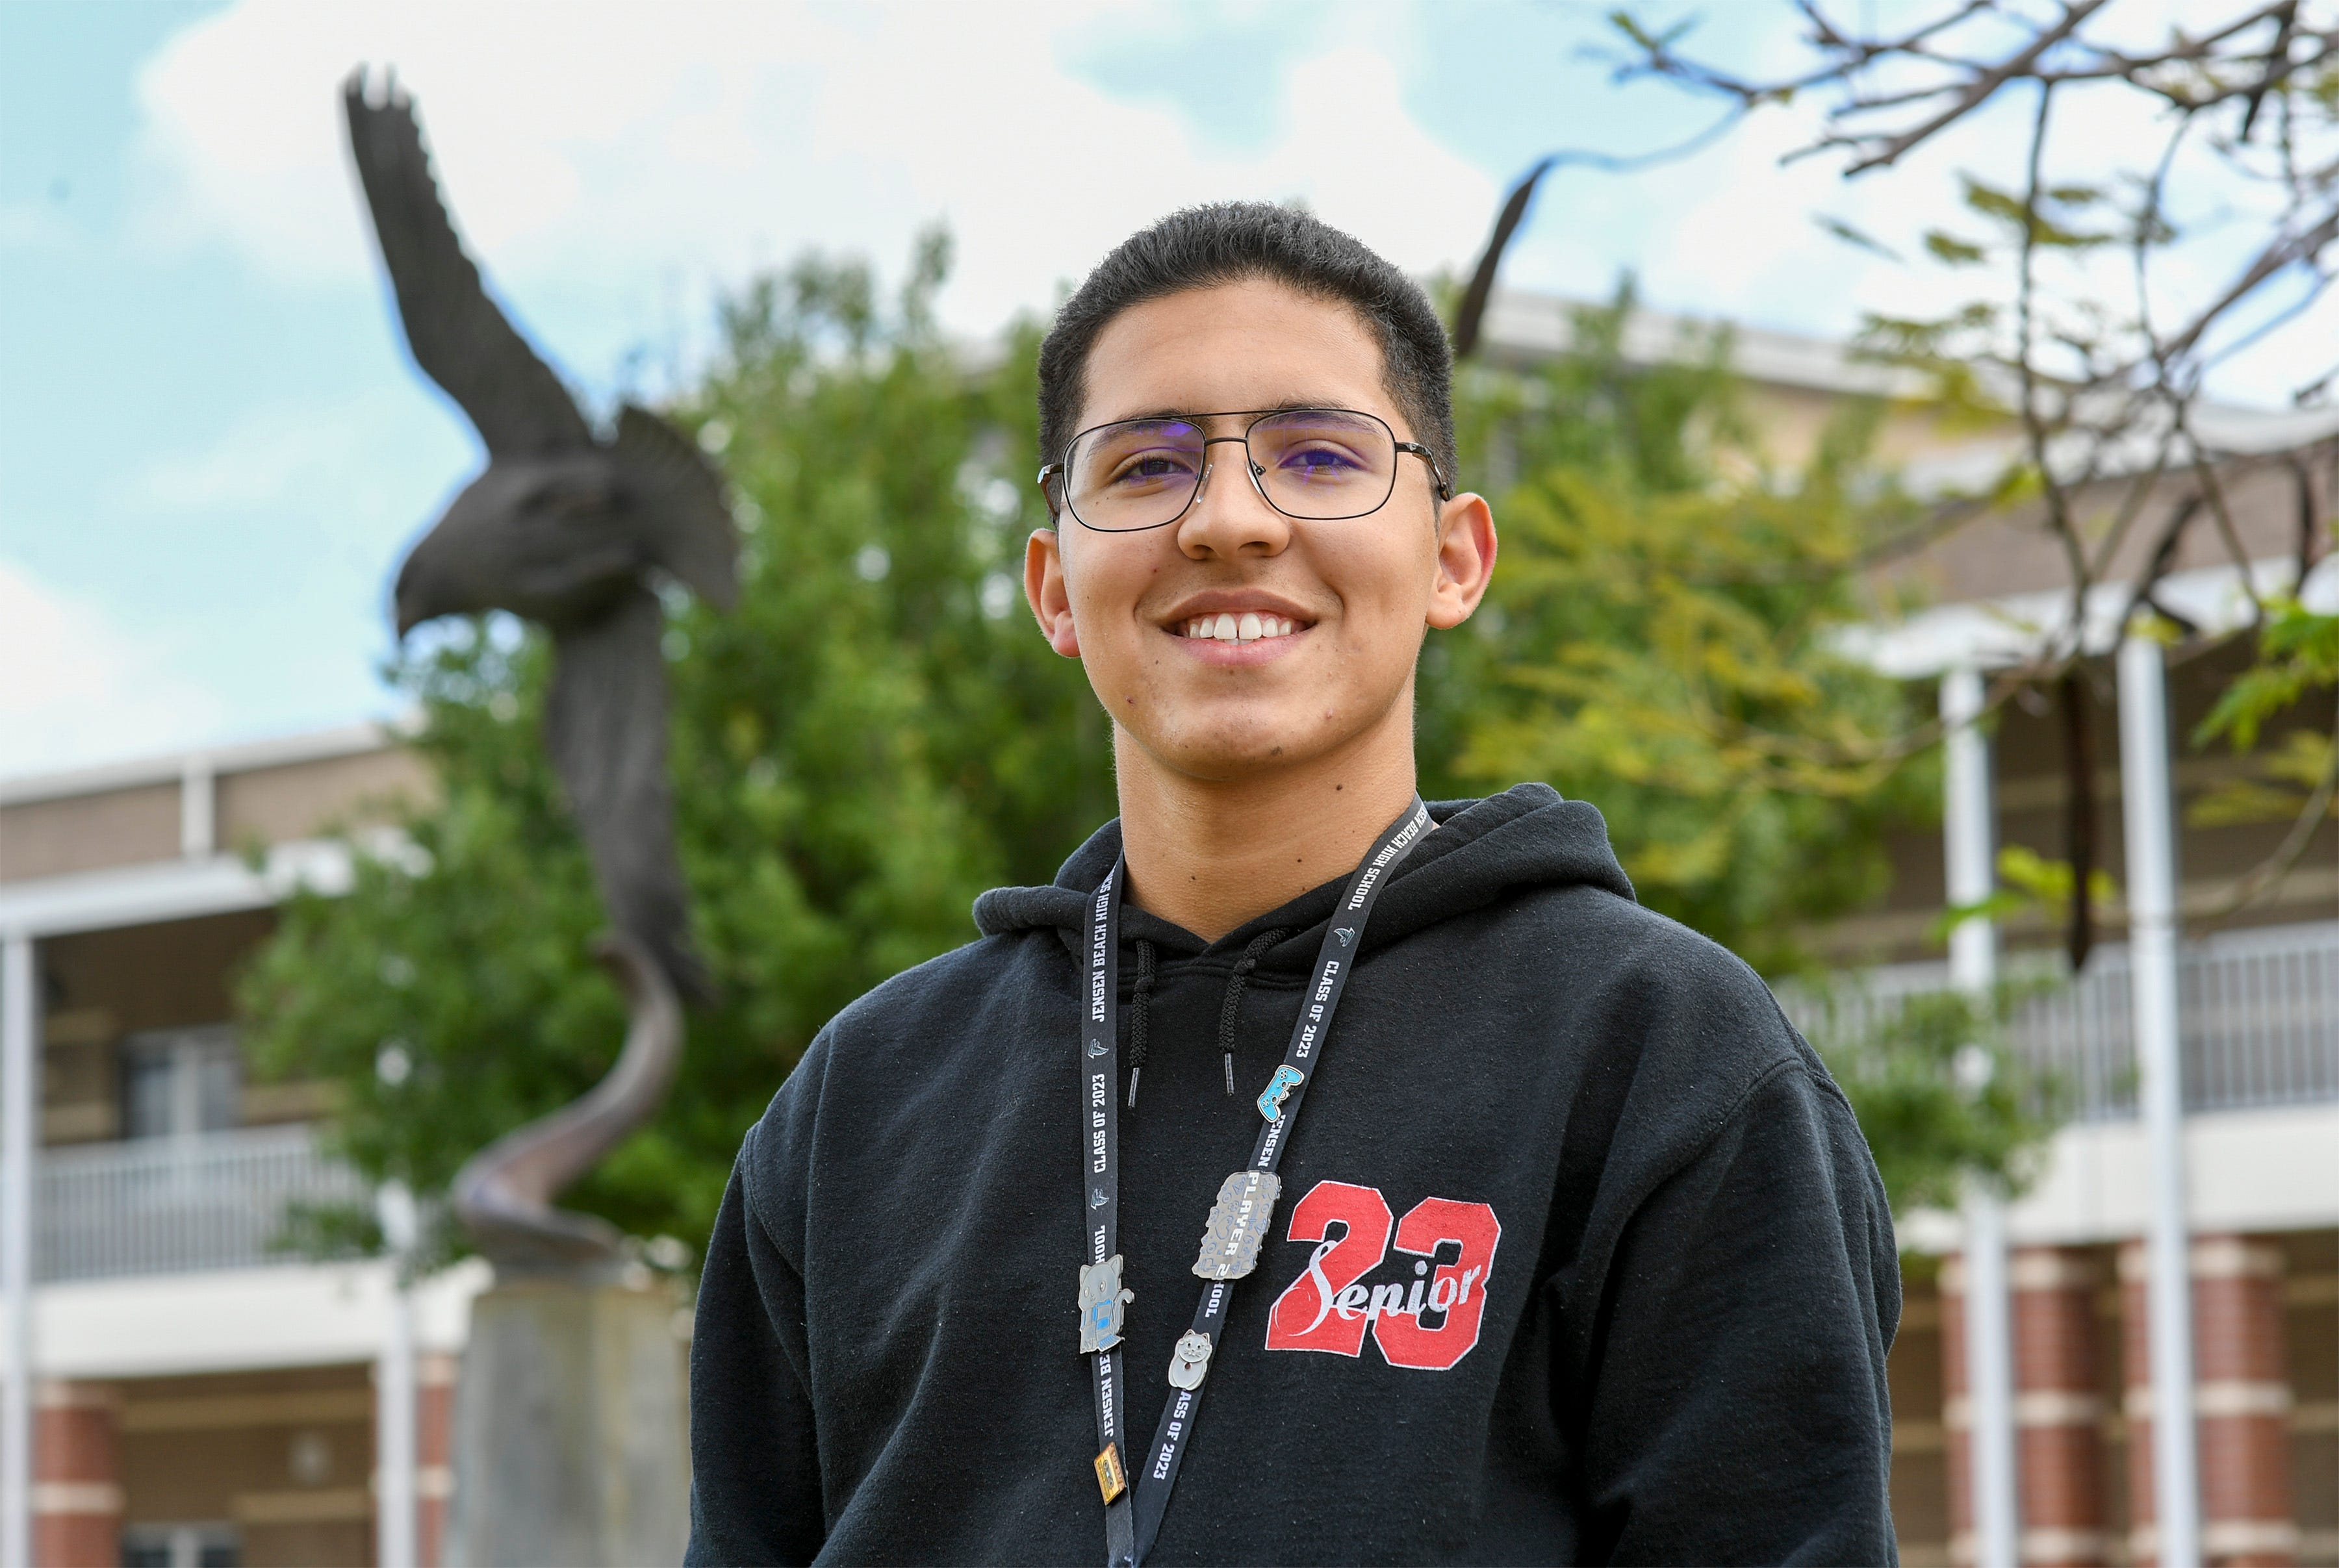 Juan Torres had to navigate online high school classes with limited English skills; when schools reopened, he ignored COVID concerns to improve his grasp of the language.